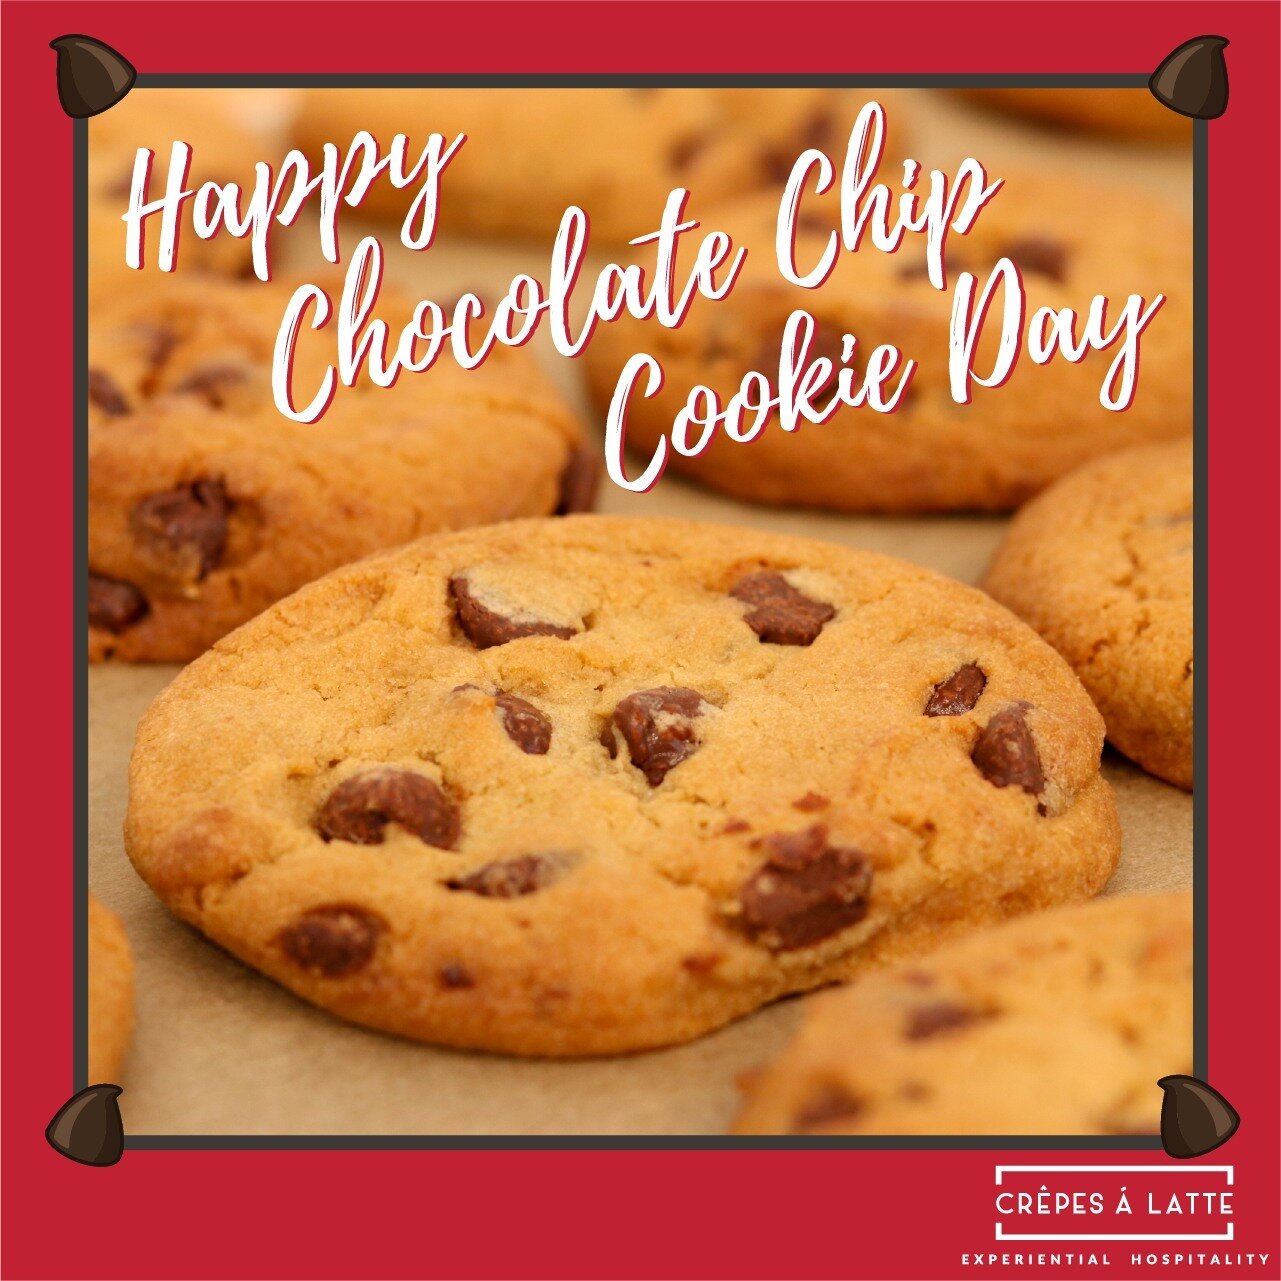 A great classic never goes out of style. Raise a cold glass of milk with us as we celebrate #ChocolateChipCookieDay! Want to have this service at your next show? Let us know at marketing@crepesalatte.com